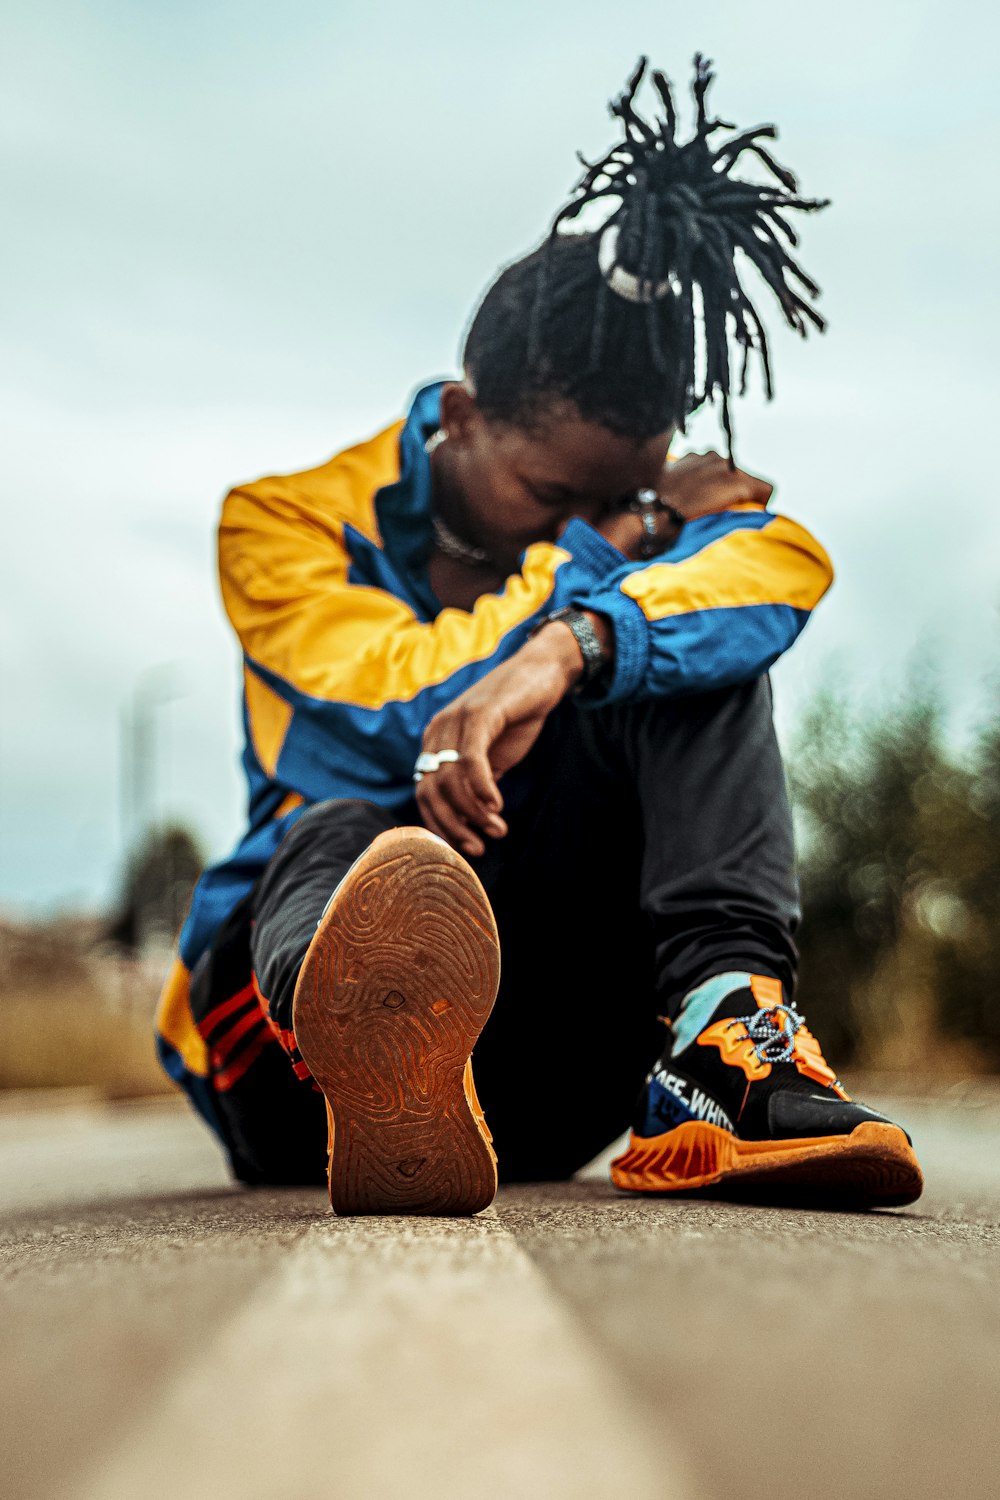 a person with dreadlocks sitting on the ground